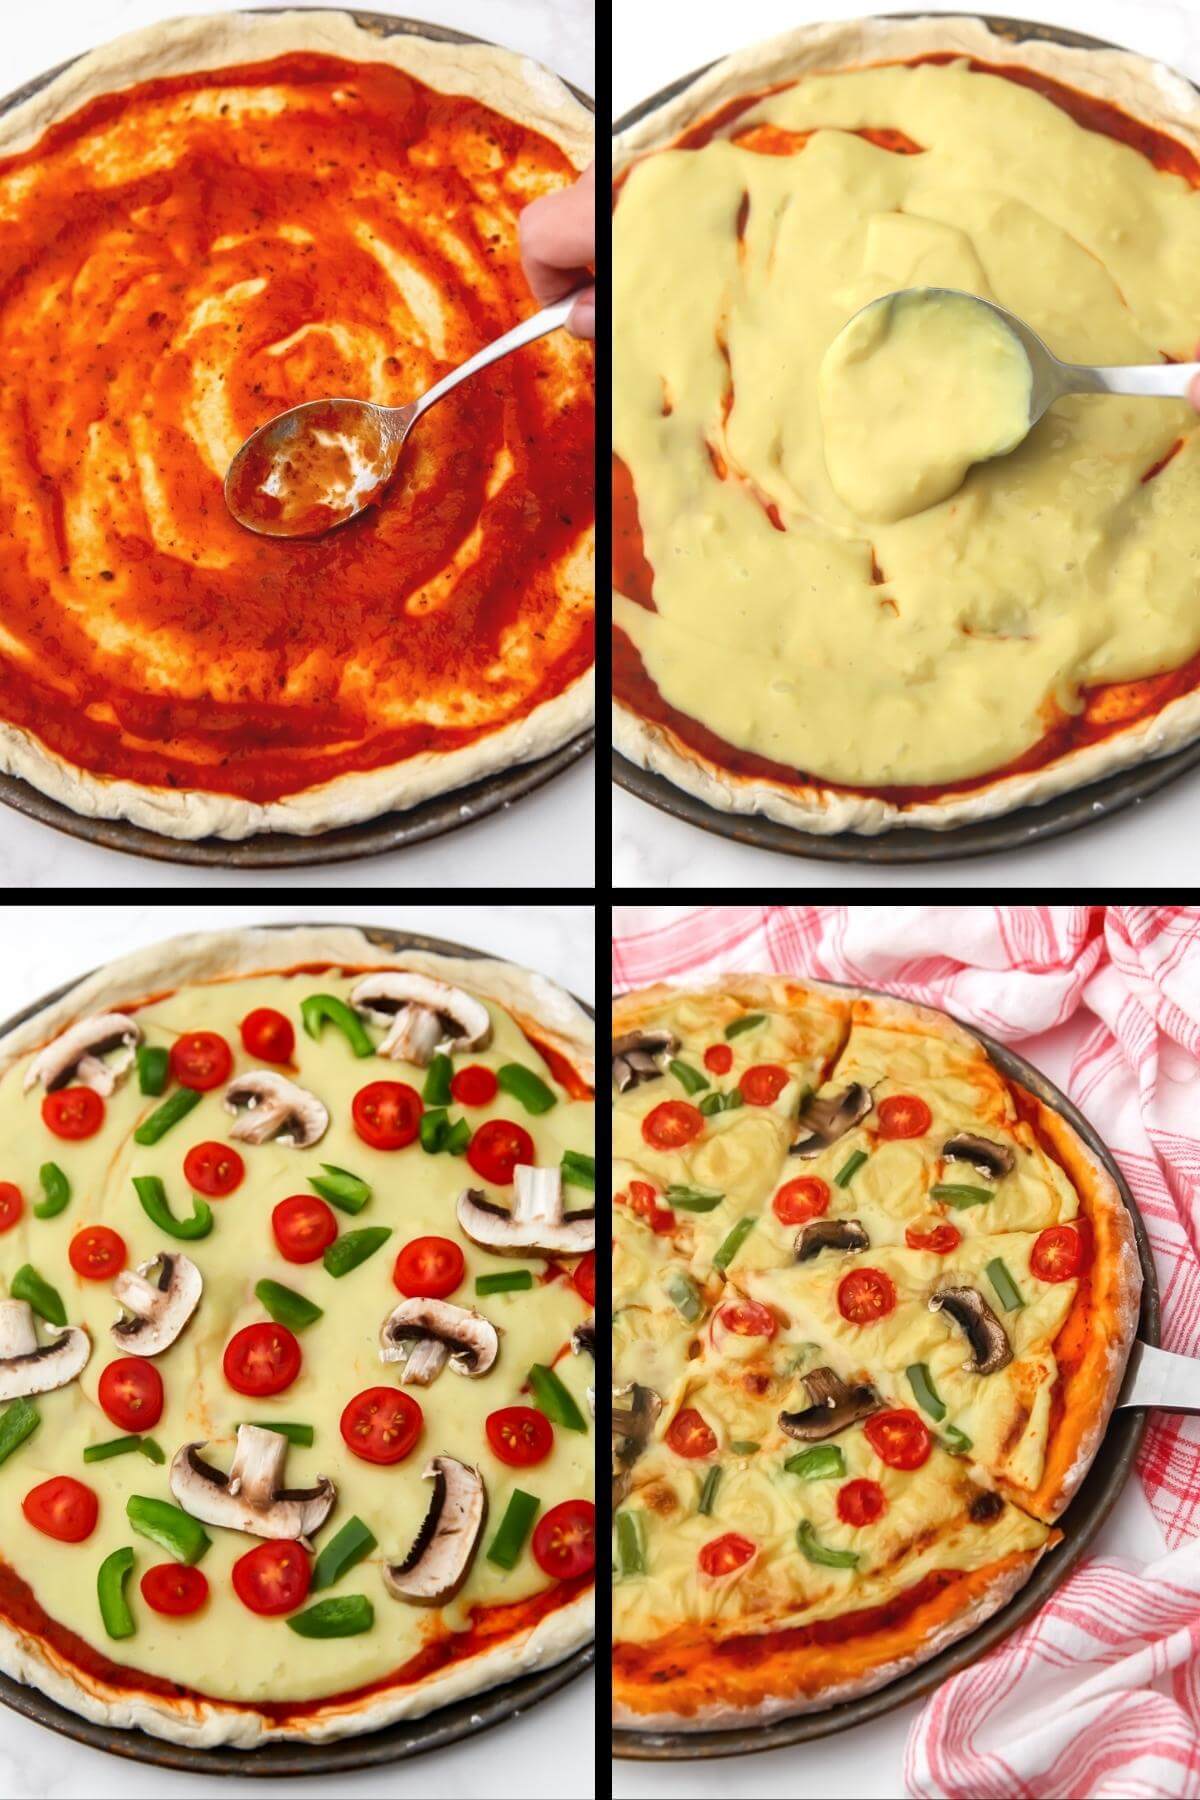 A collage of 4 images showing the process steps for making pizza with homemade vegan pizza cheese.